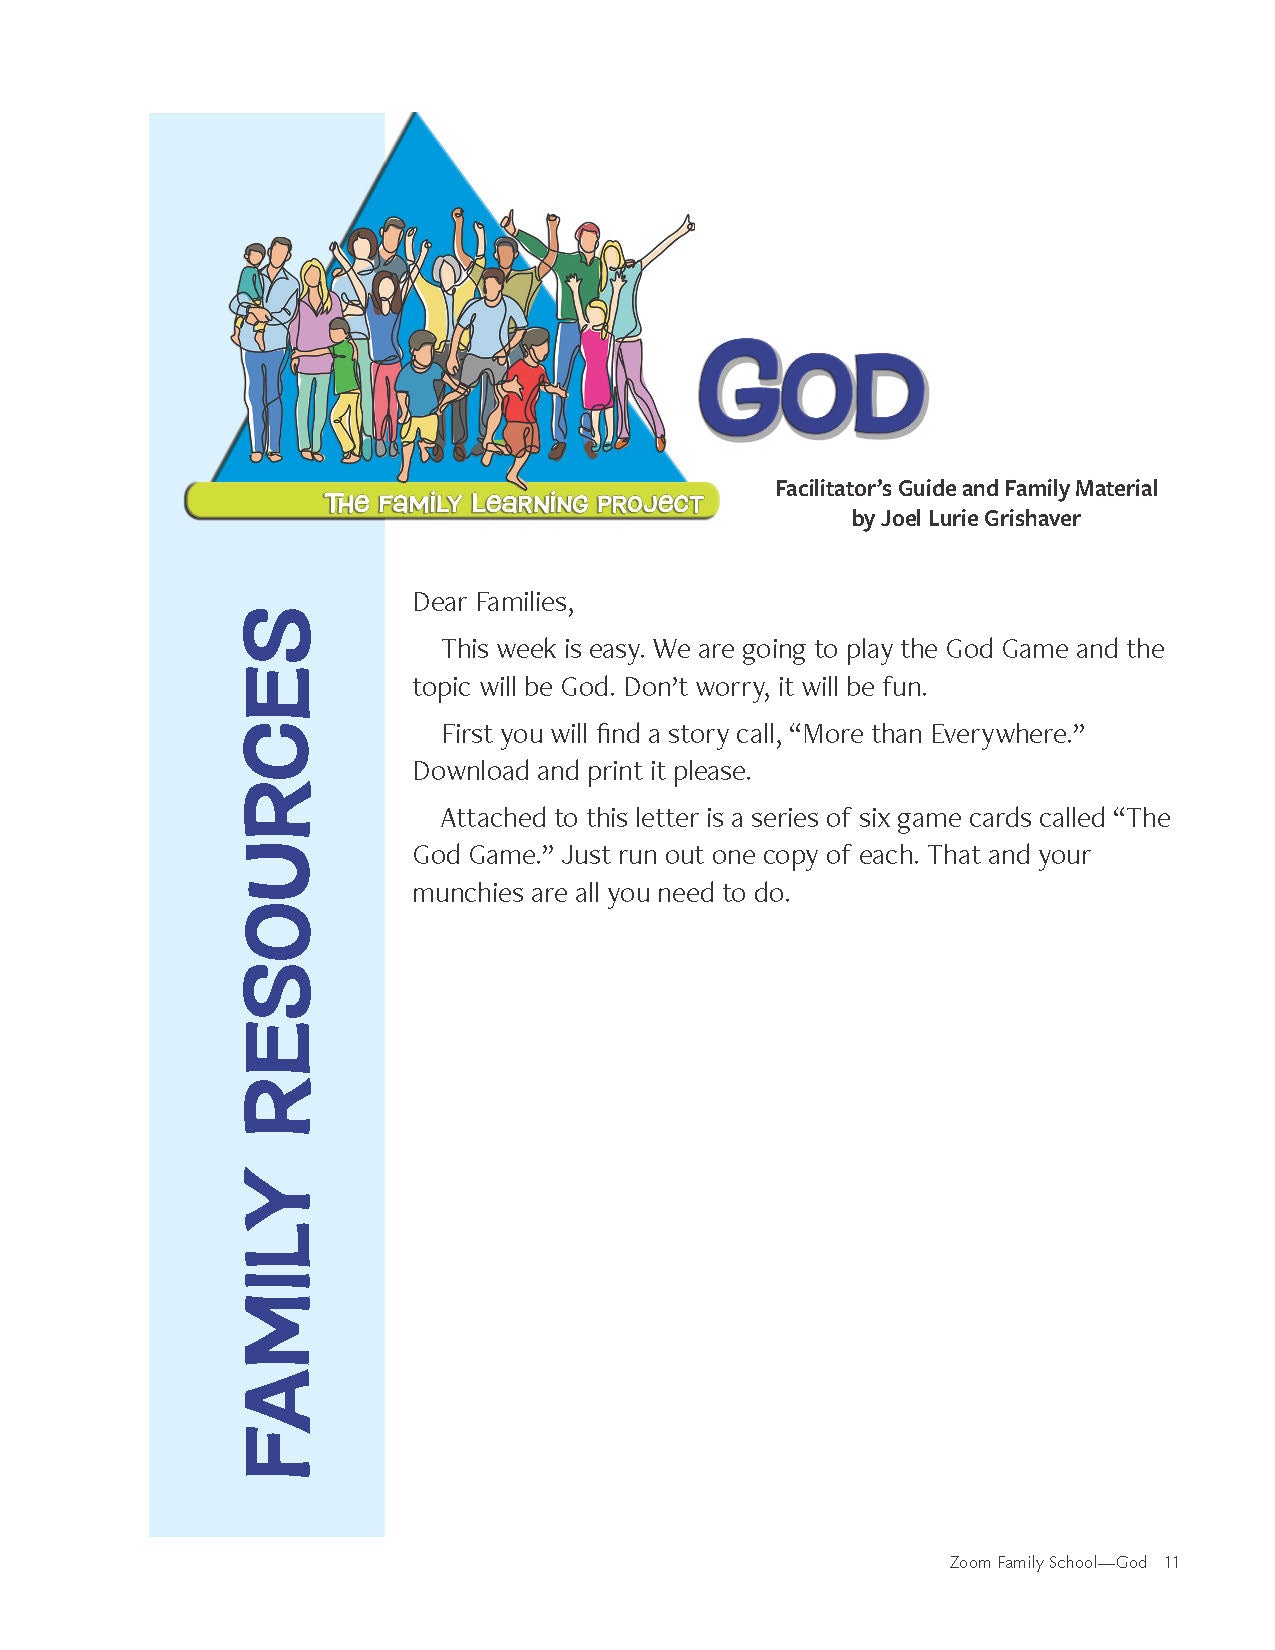 Family Learning Project: God